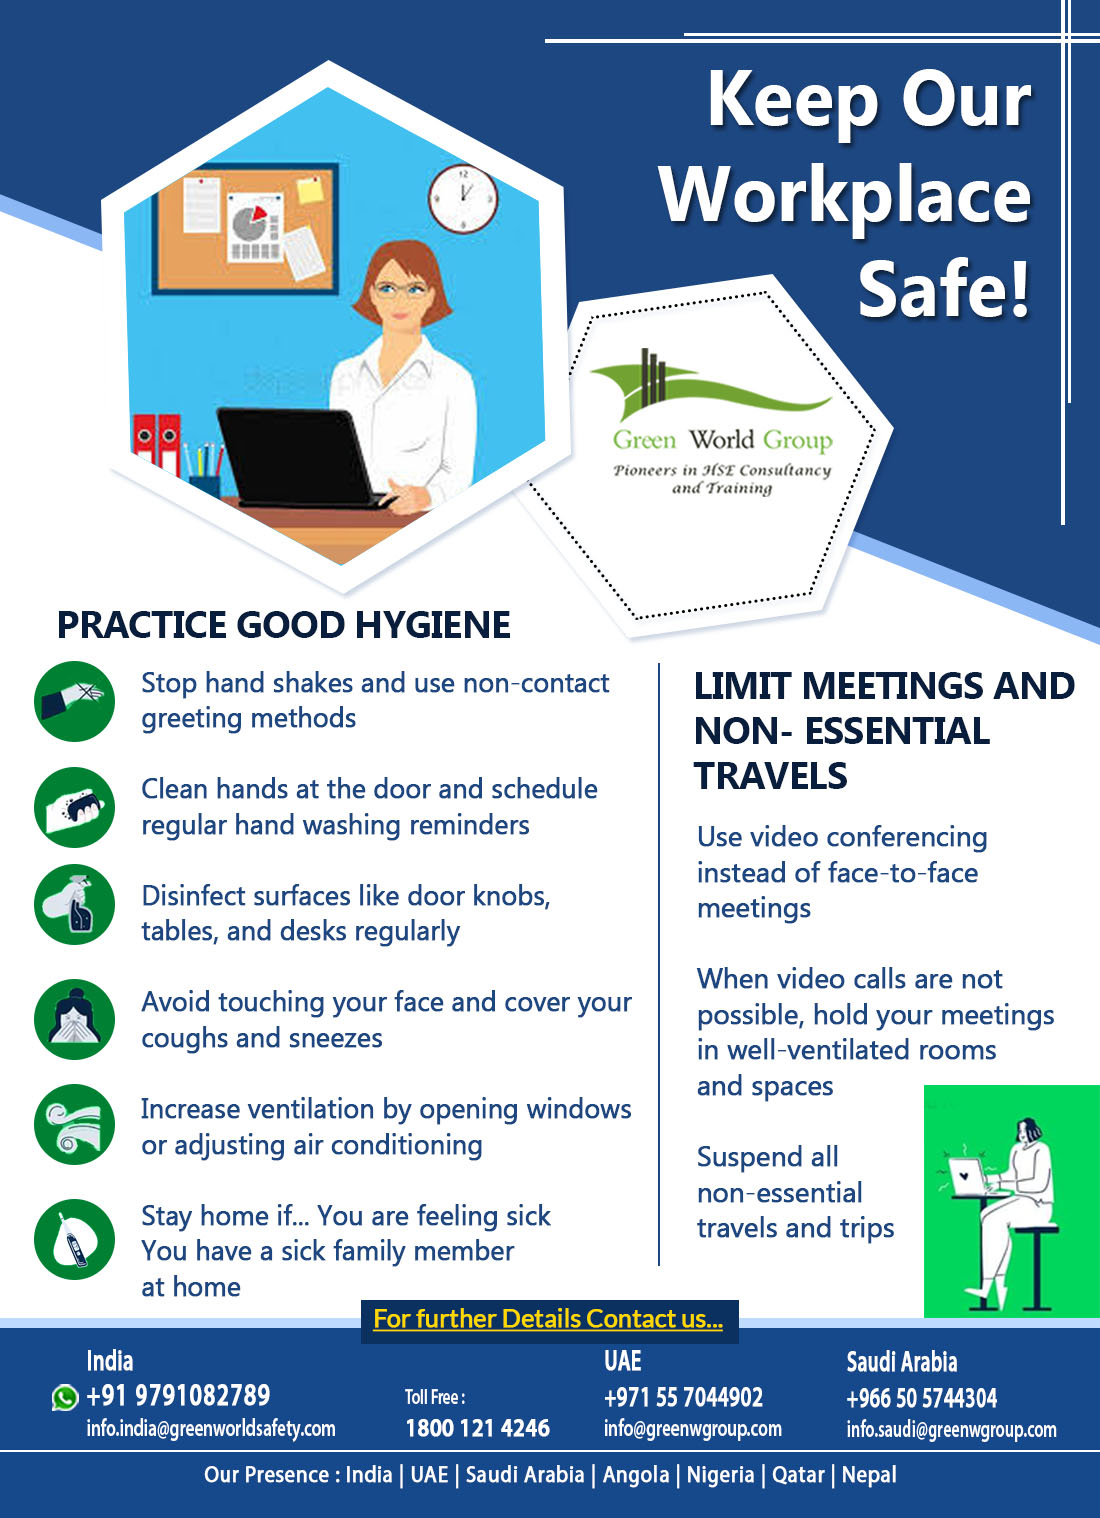 Keep Our Workplace Safe! - GWG